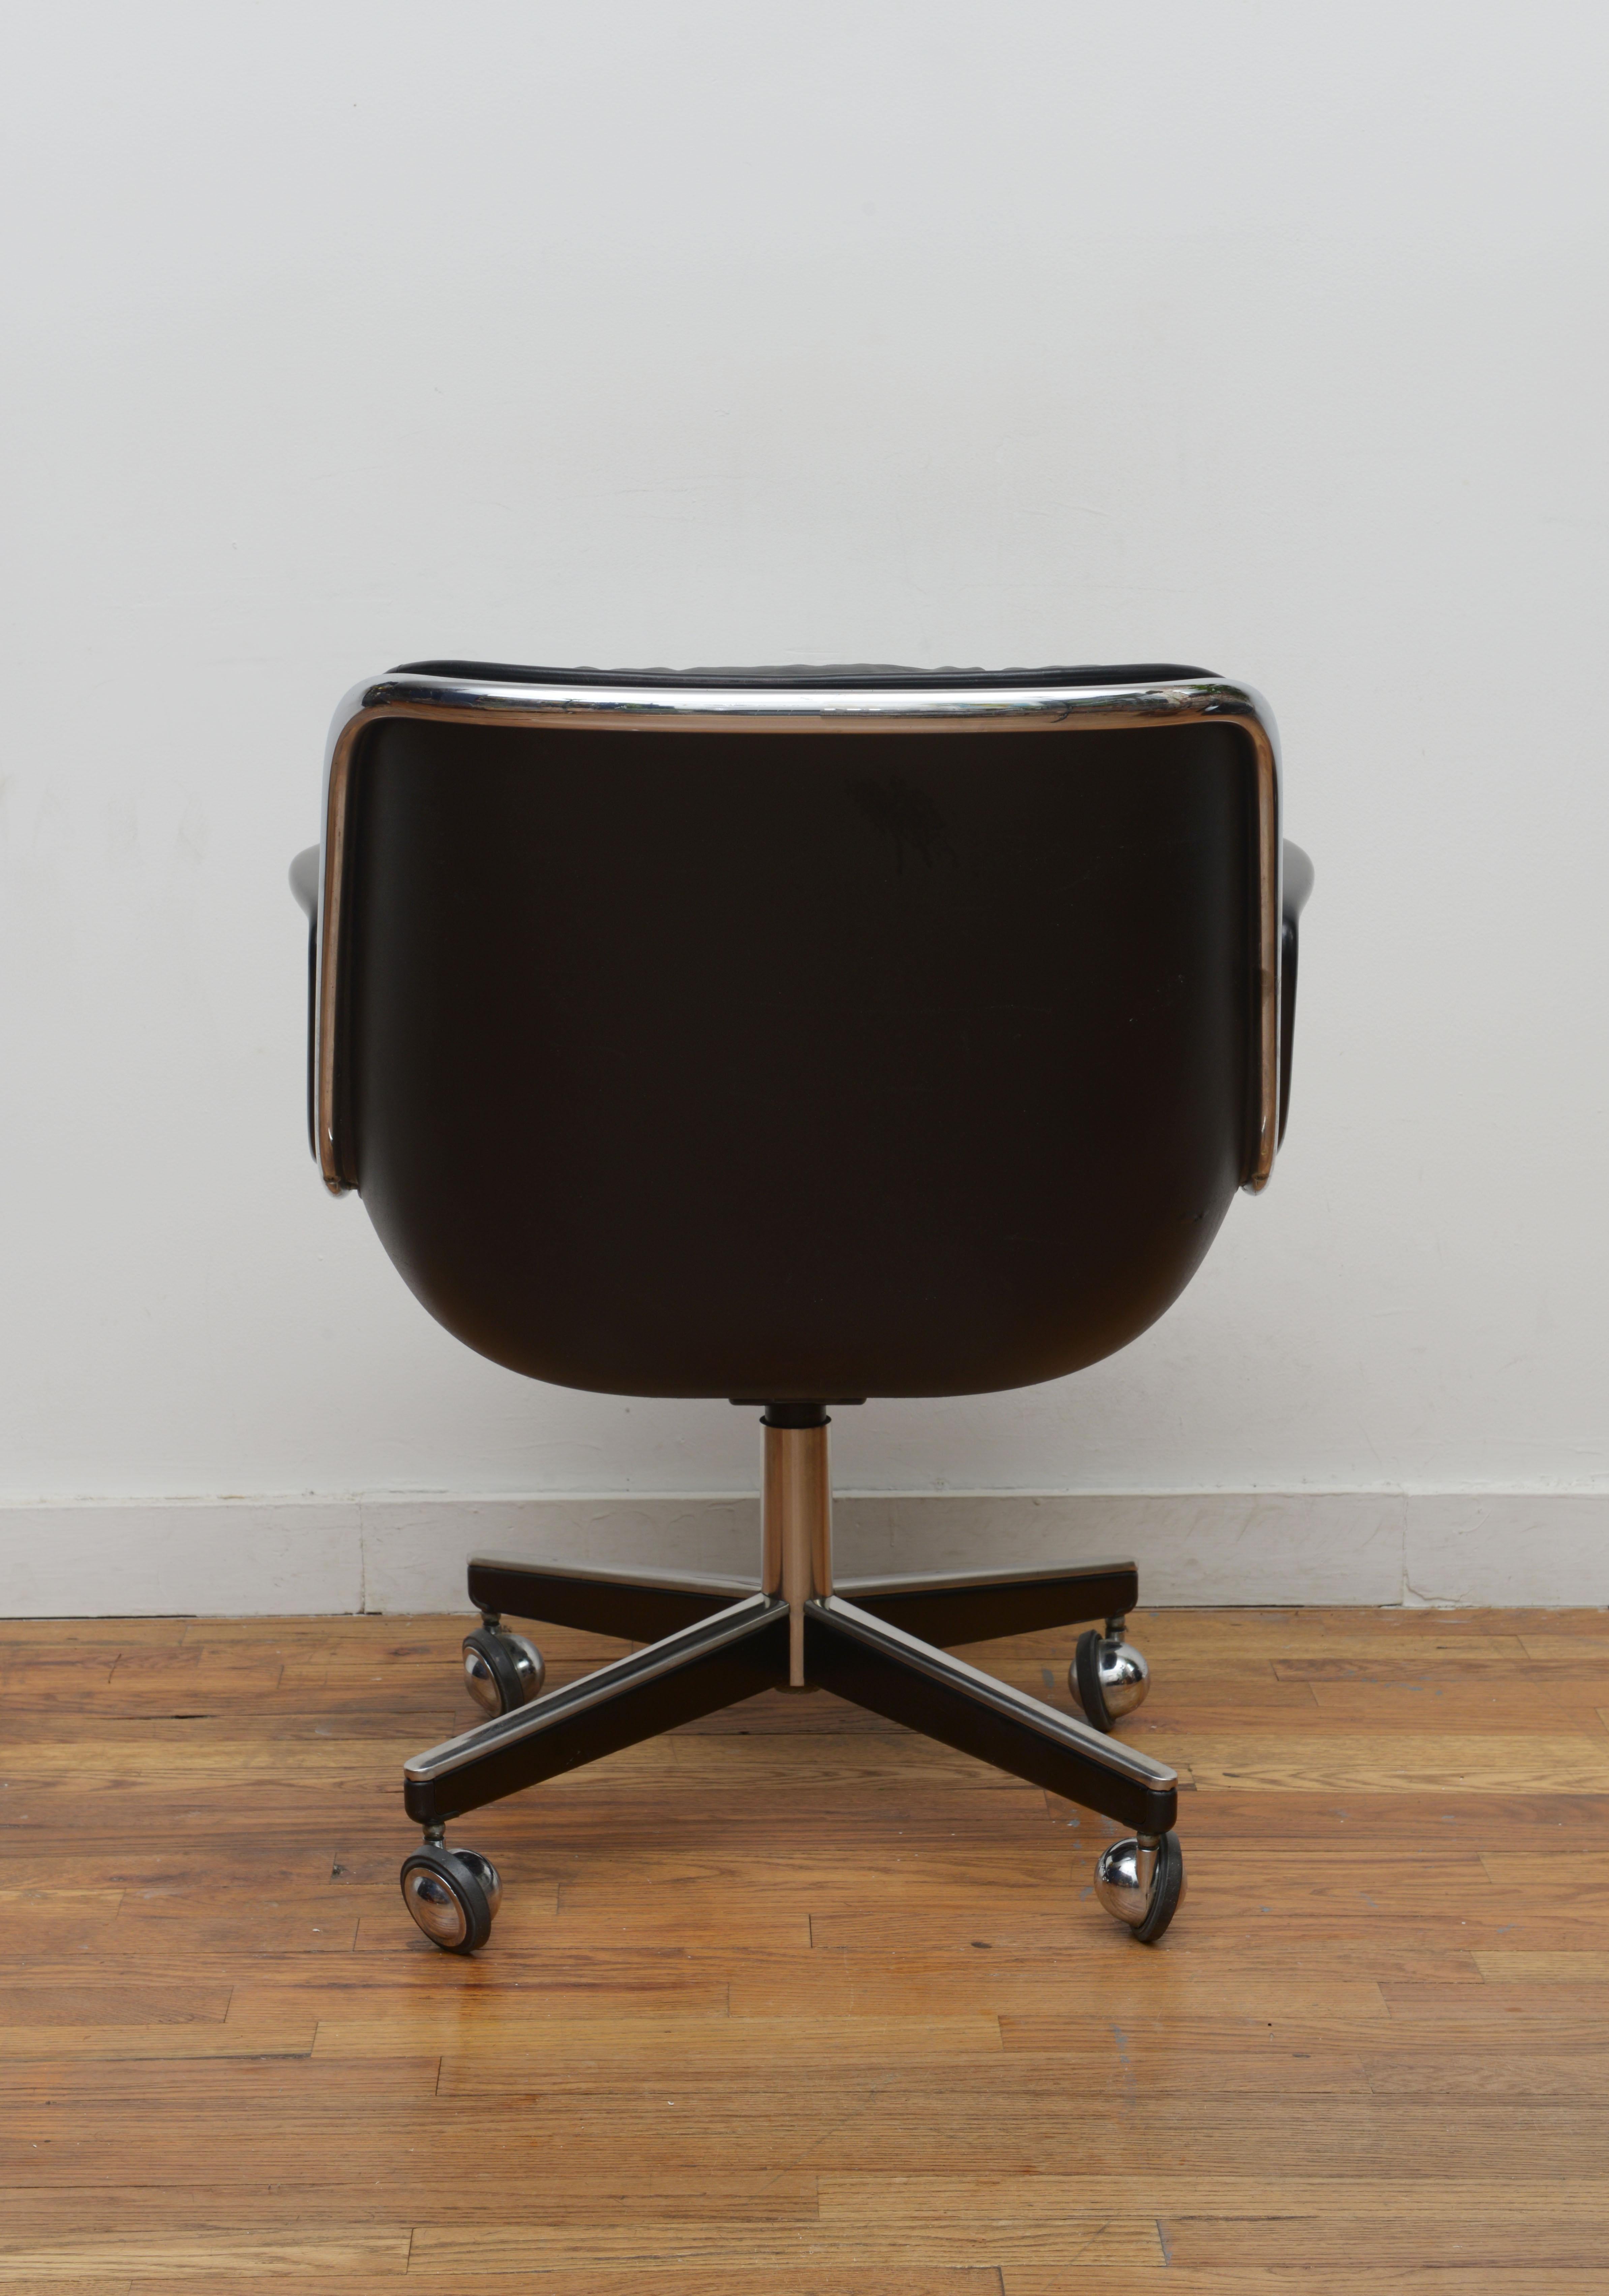 Mid-Century Modern Pollock Executive Chair For Knoll In Black Leather with Ball Casters 1970s (Sign